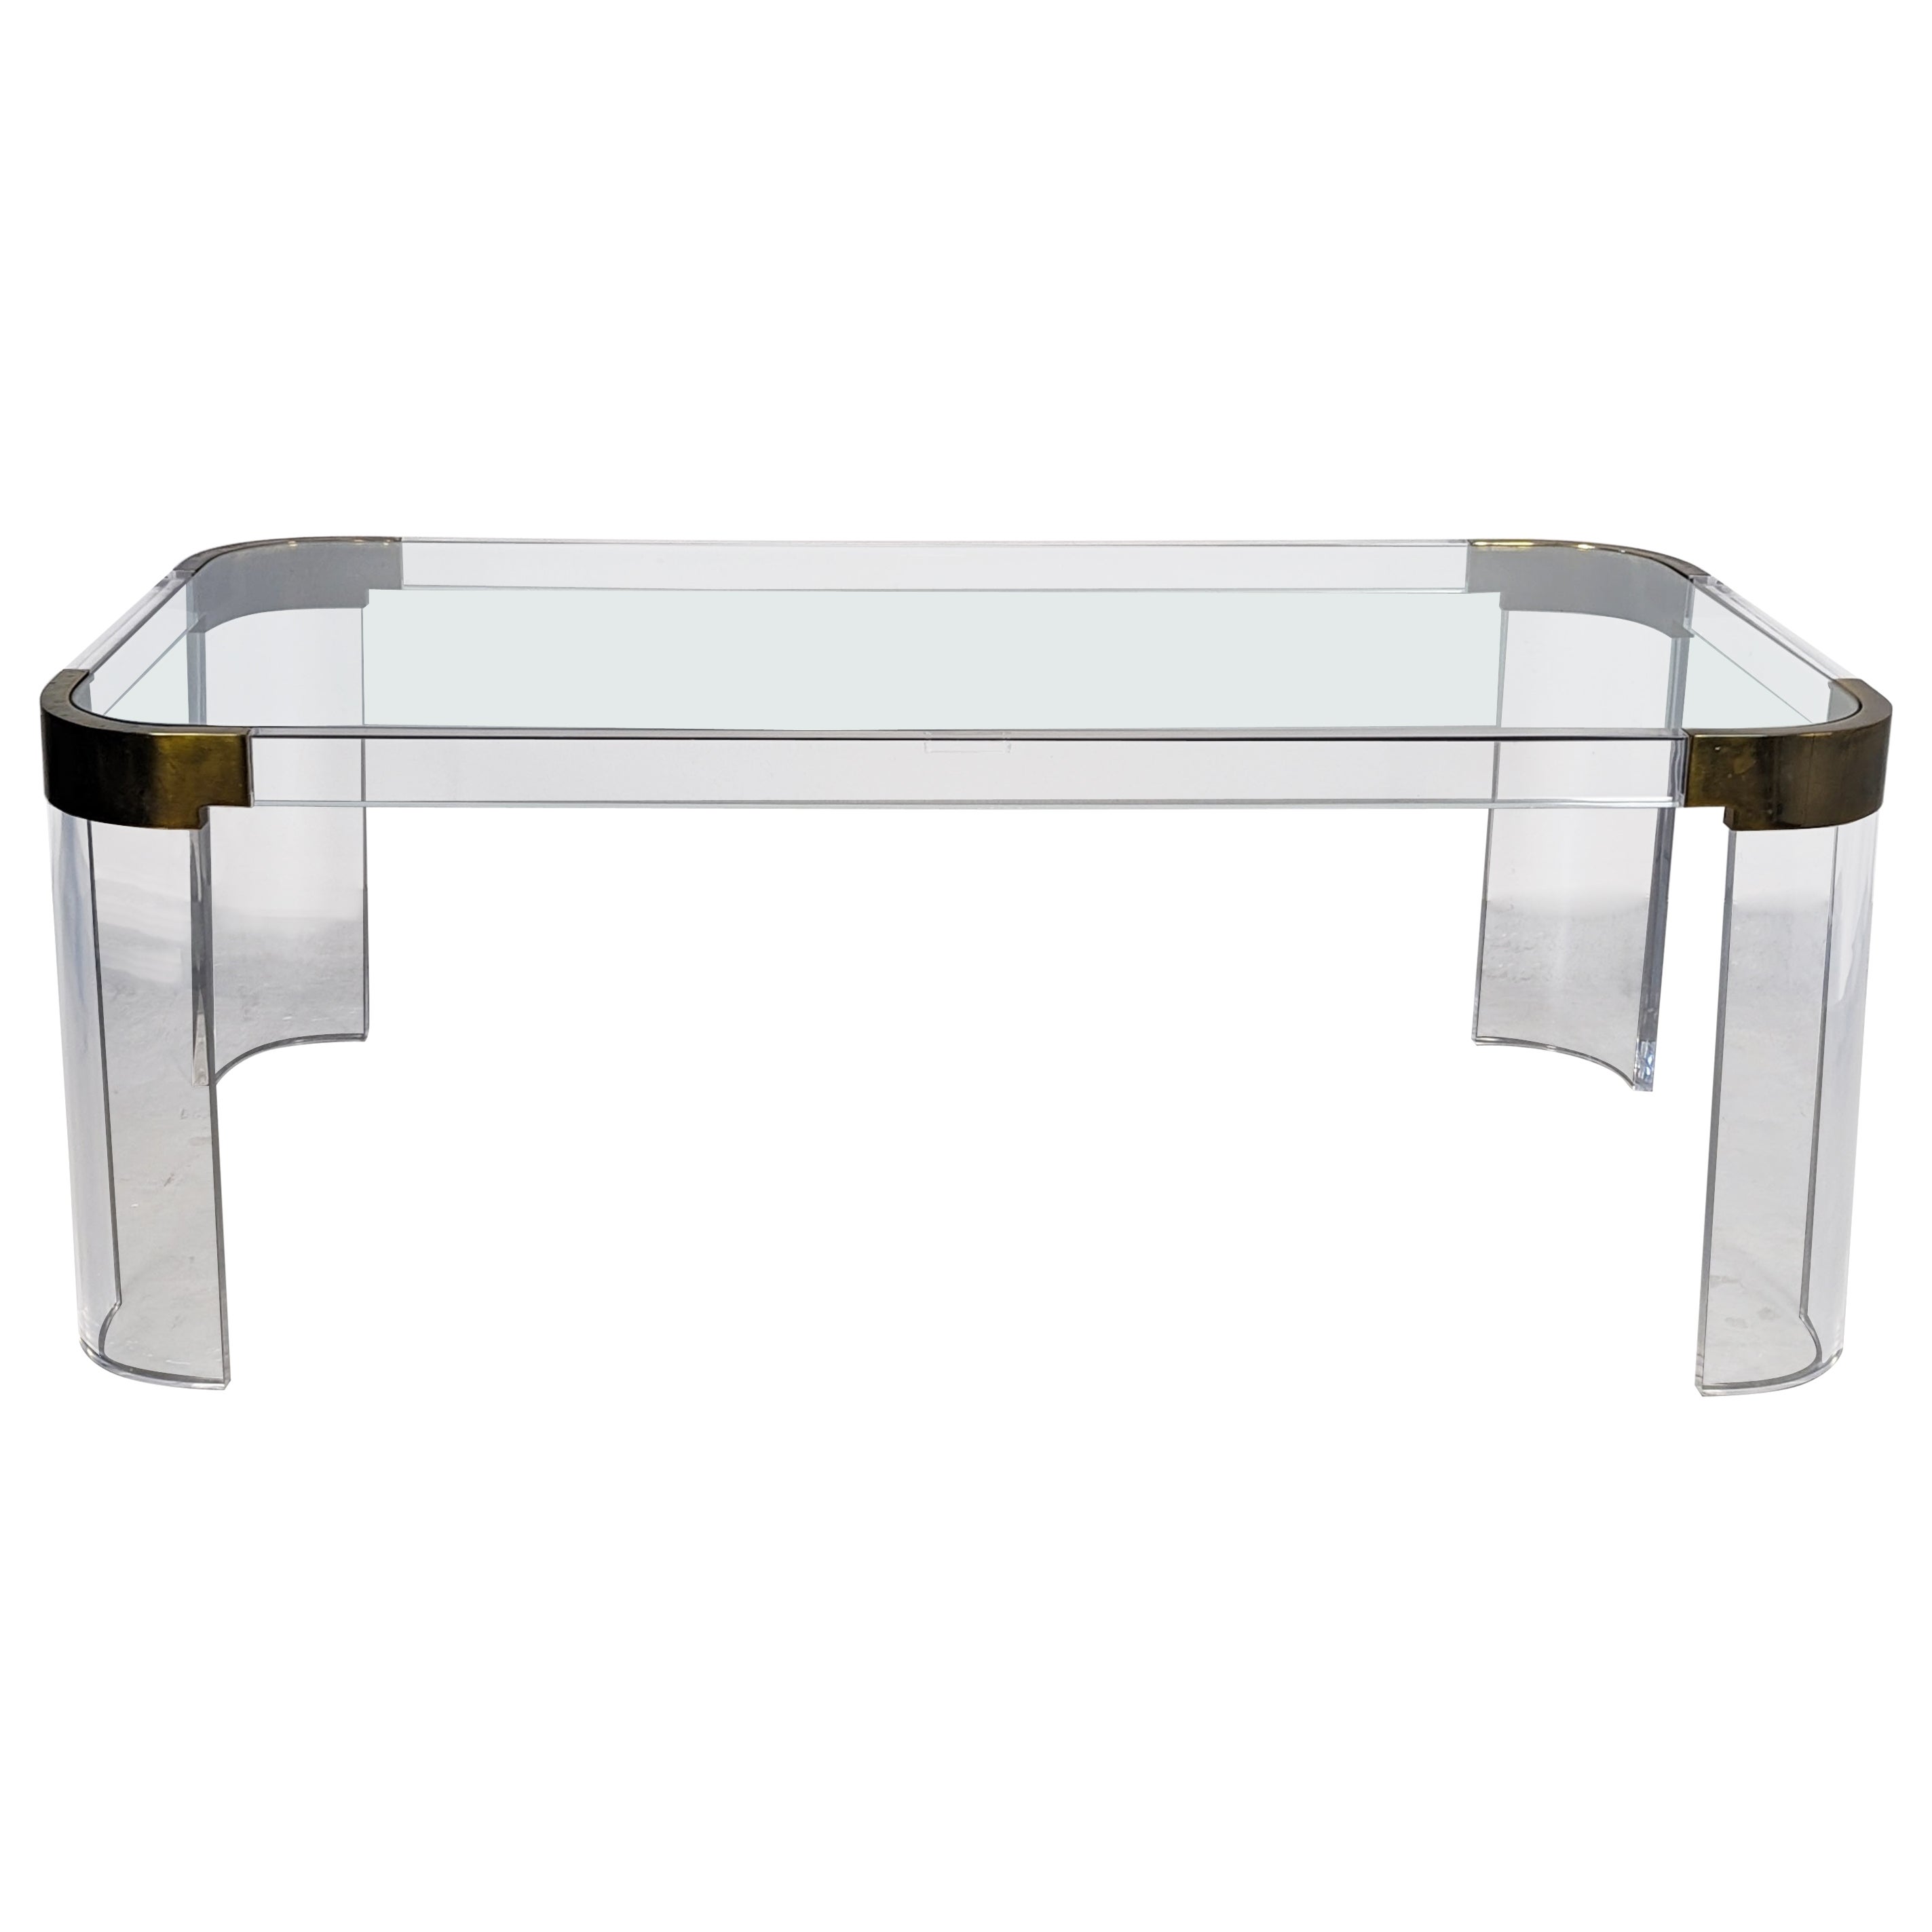 Lucite Dining Table by Charles Hollis Jones from the "Waterfall" Line, c1970s